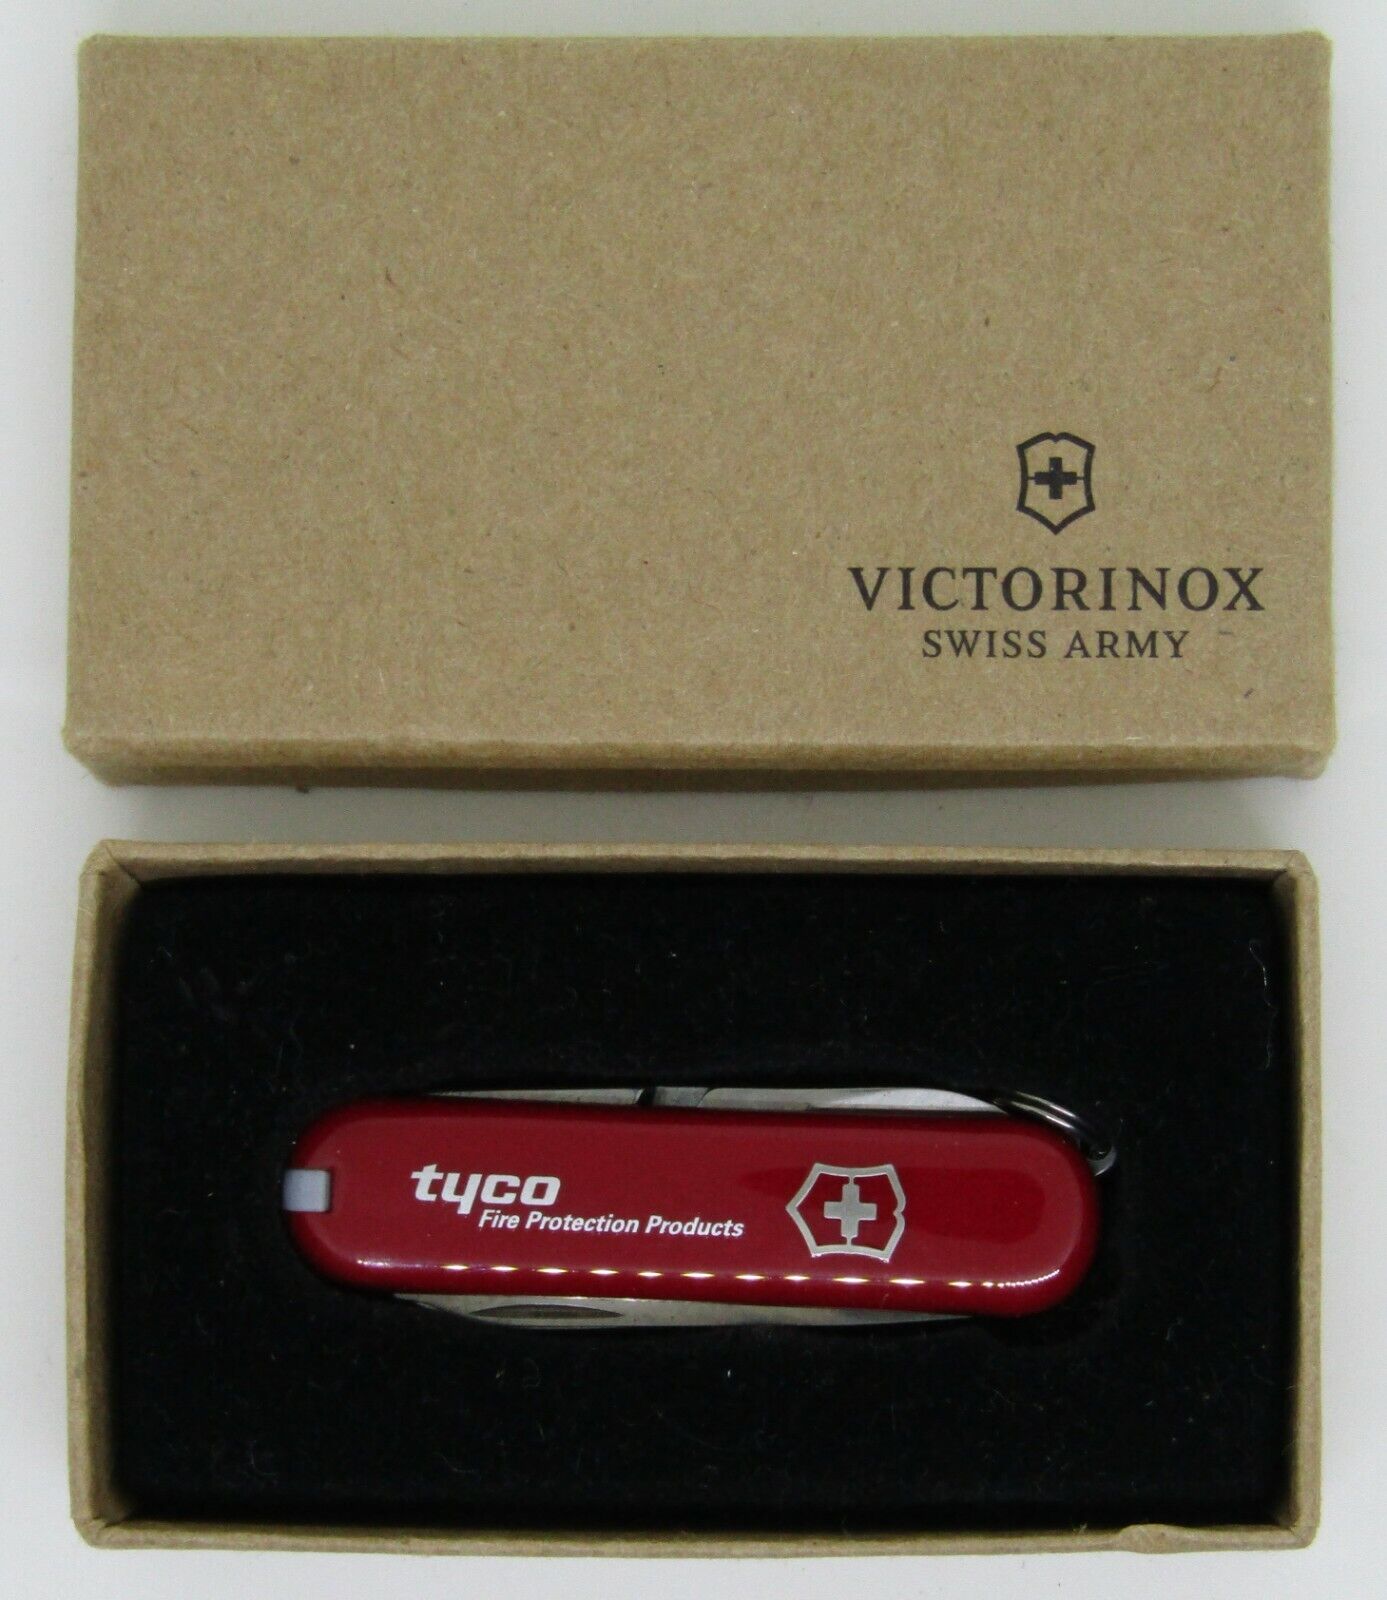 Victorinox Swiss Army Knife - Tyco Fire Protection Products Ansul Promo Item